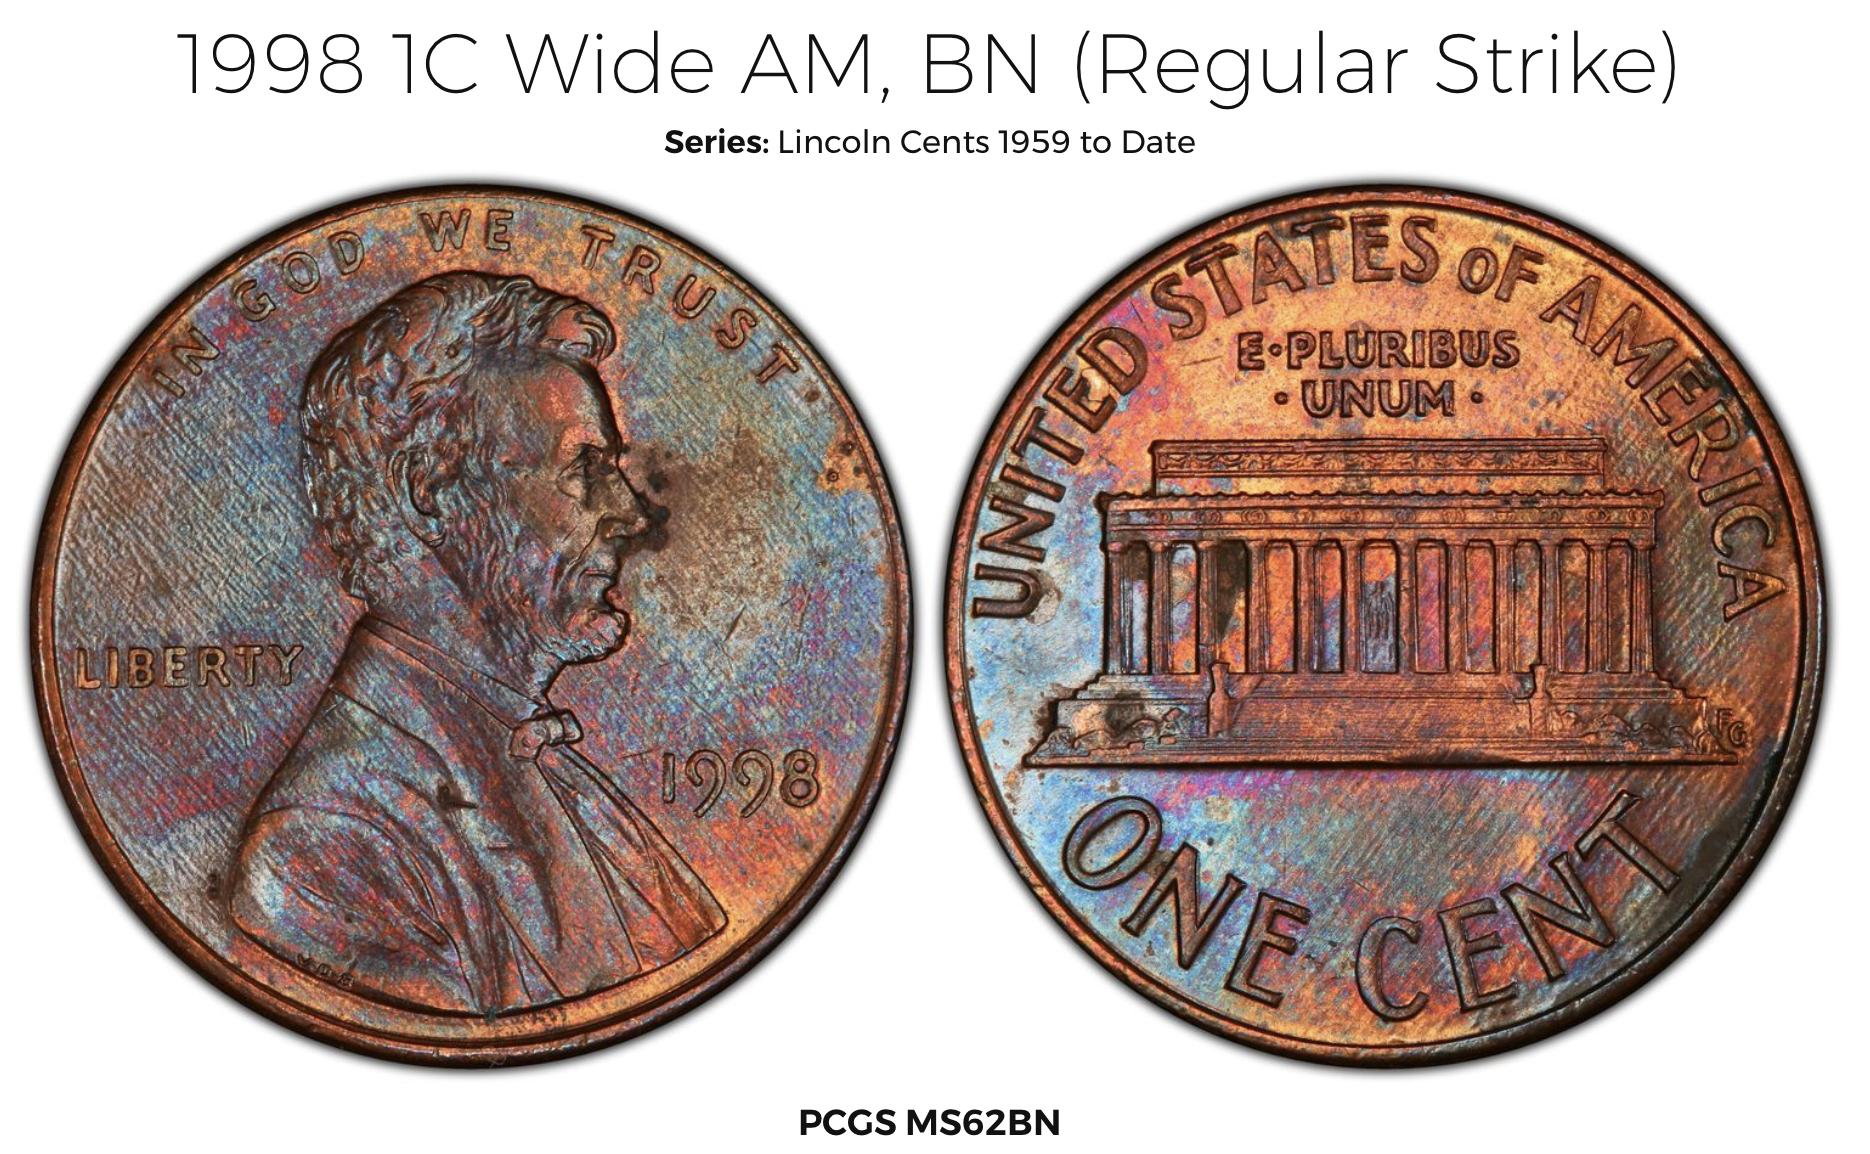 1998-P Wide AM Lincoln cent value